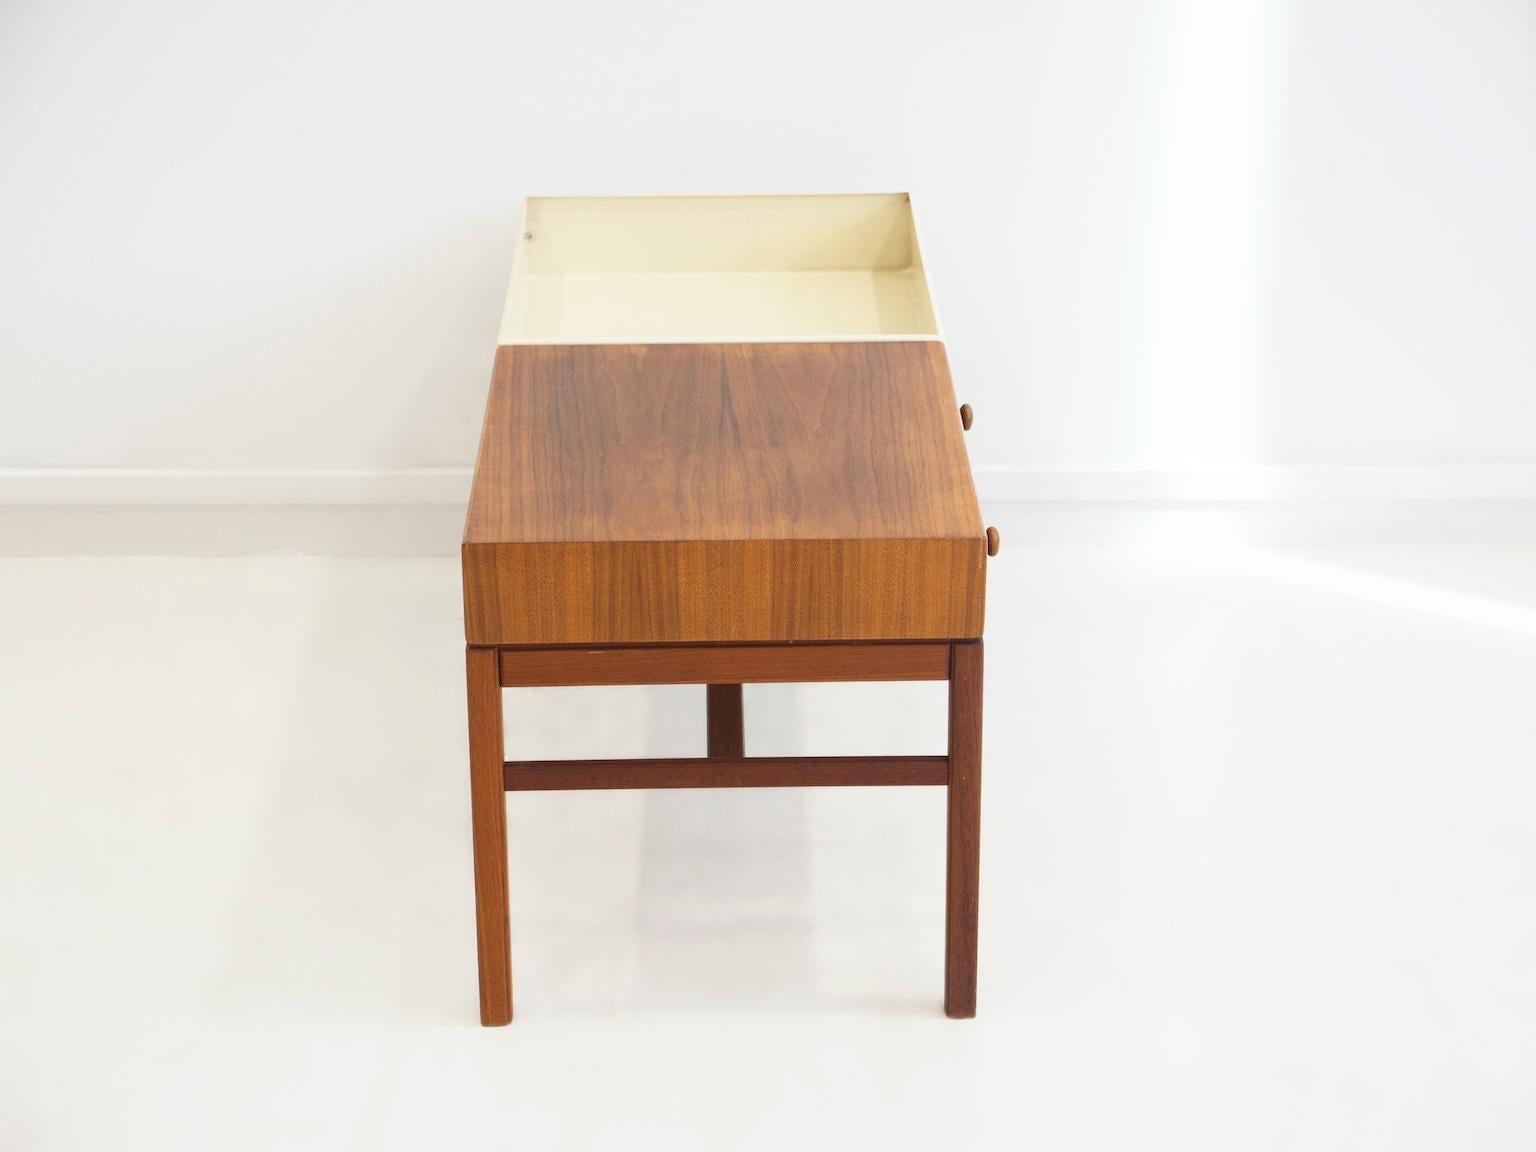 Teak Flower Table with a Drawer by Engström & Myrstrand For Sale 3